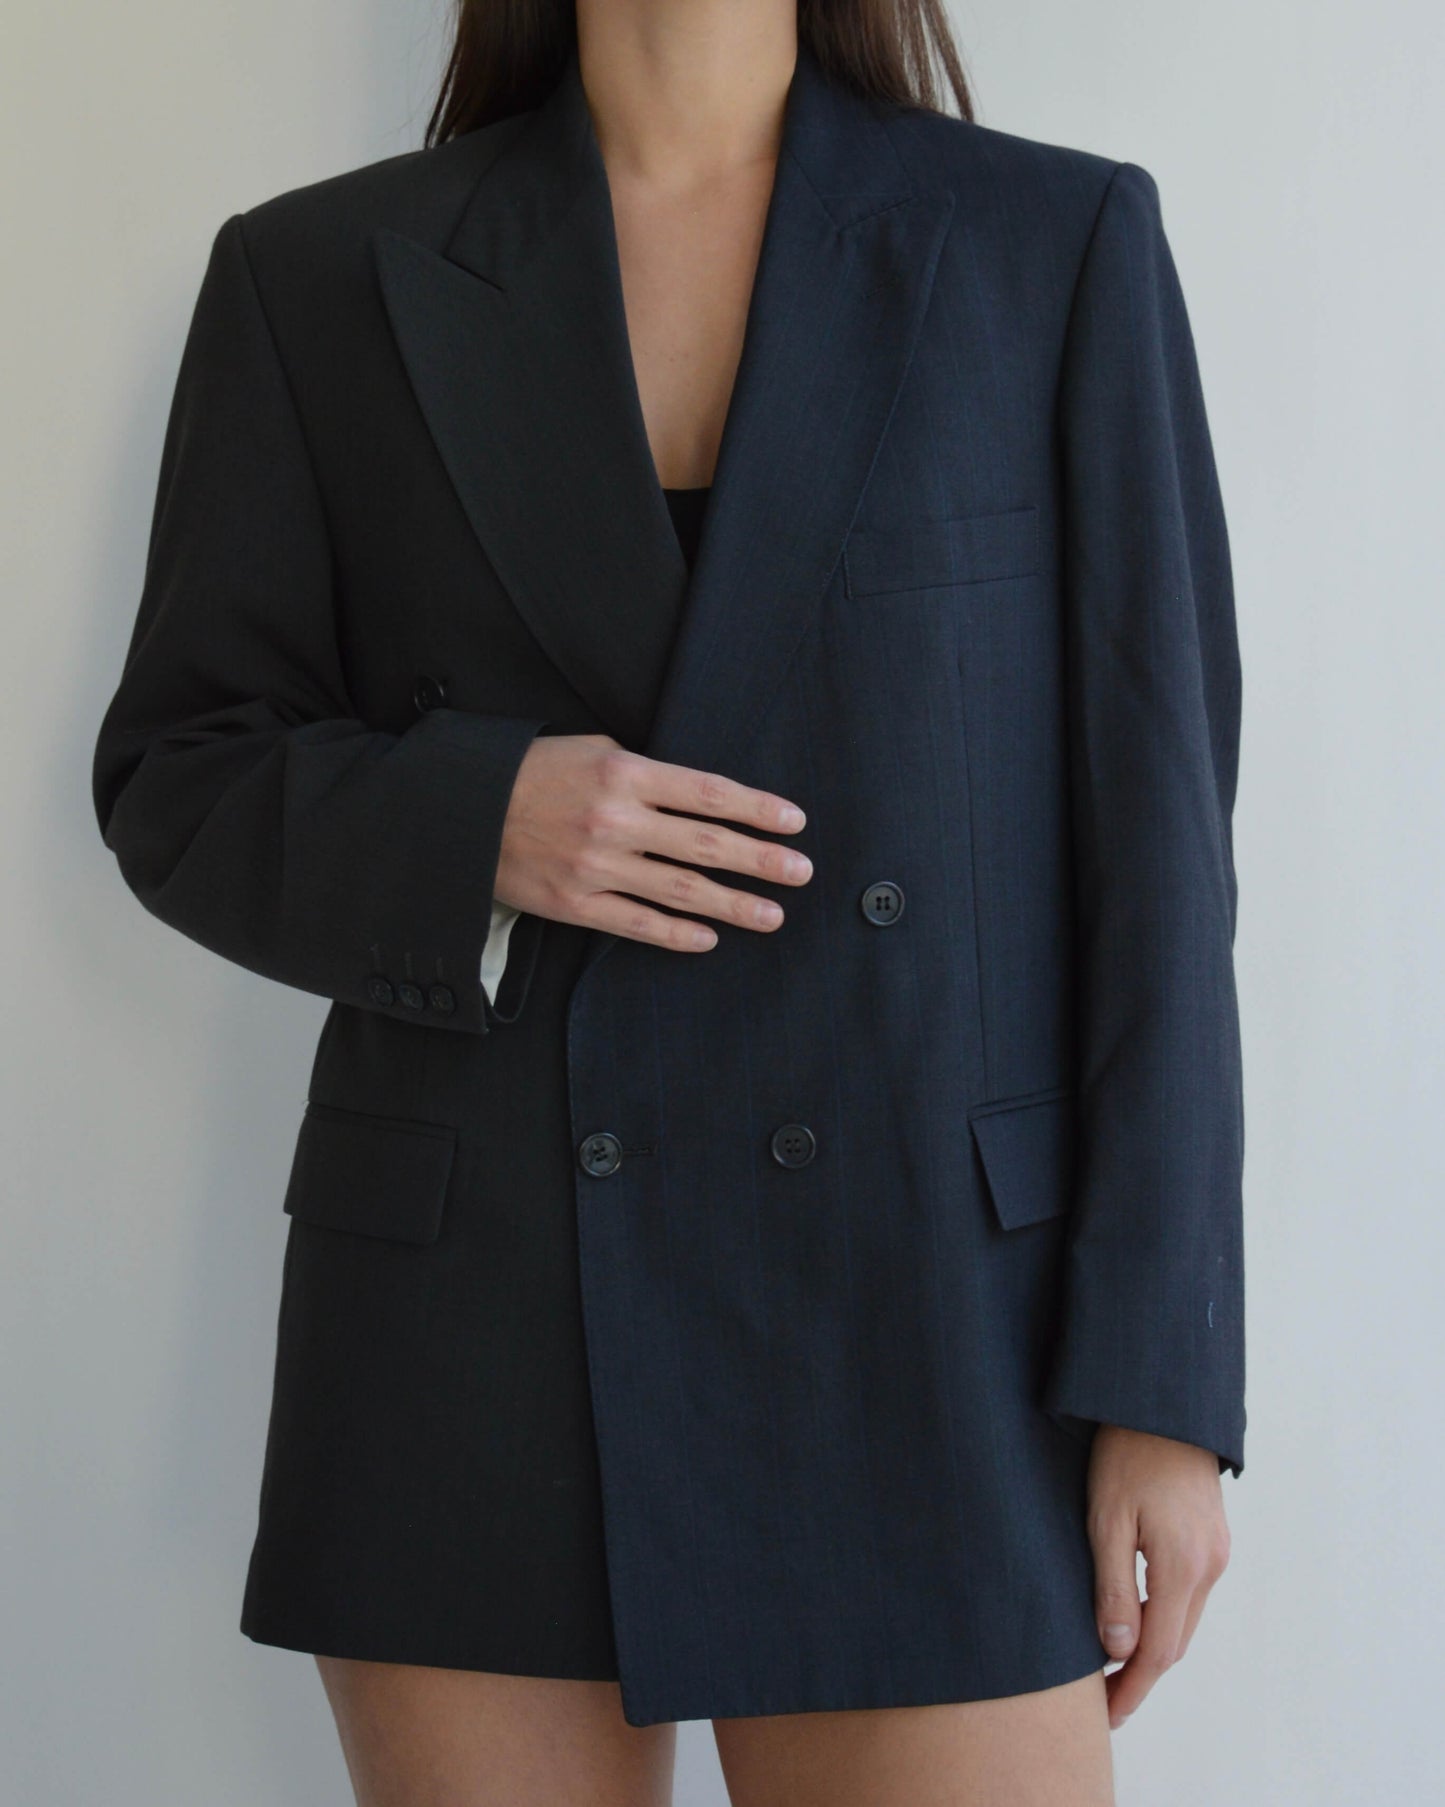 DUO Blazer - Double Breasted Gray Navy (S/L)